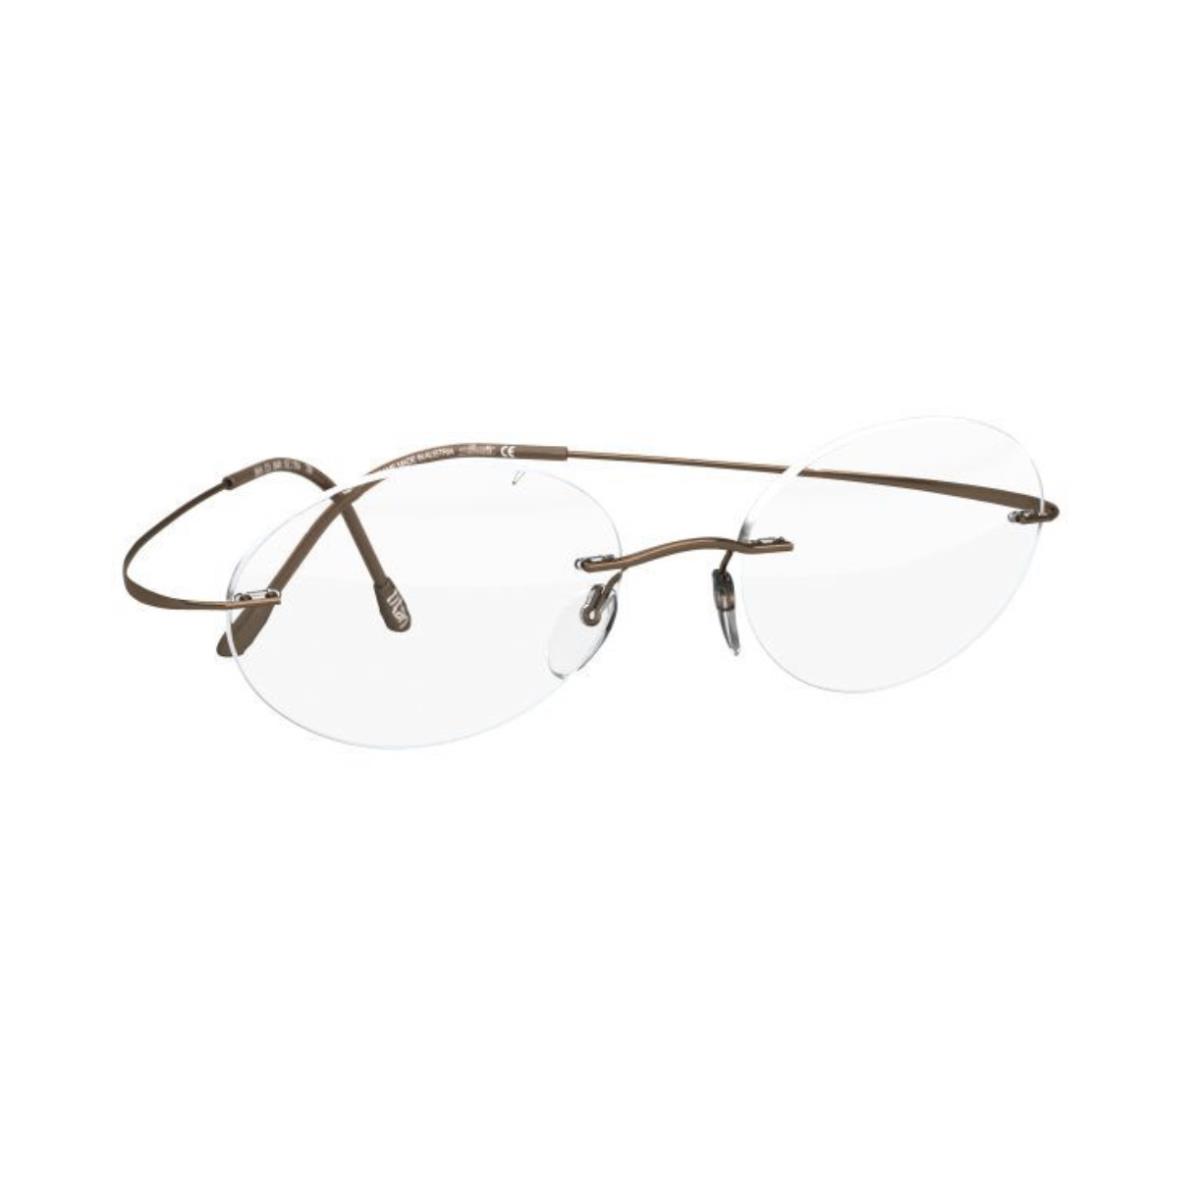 Silhouette 5515 Rimless Eyeglasses Titan Minimal Art The Must Collection Frames PINECONE - 6040, SIZE: 51-19 150, SHAPE - CO